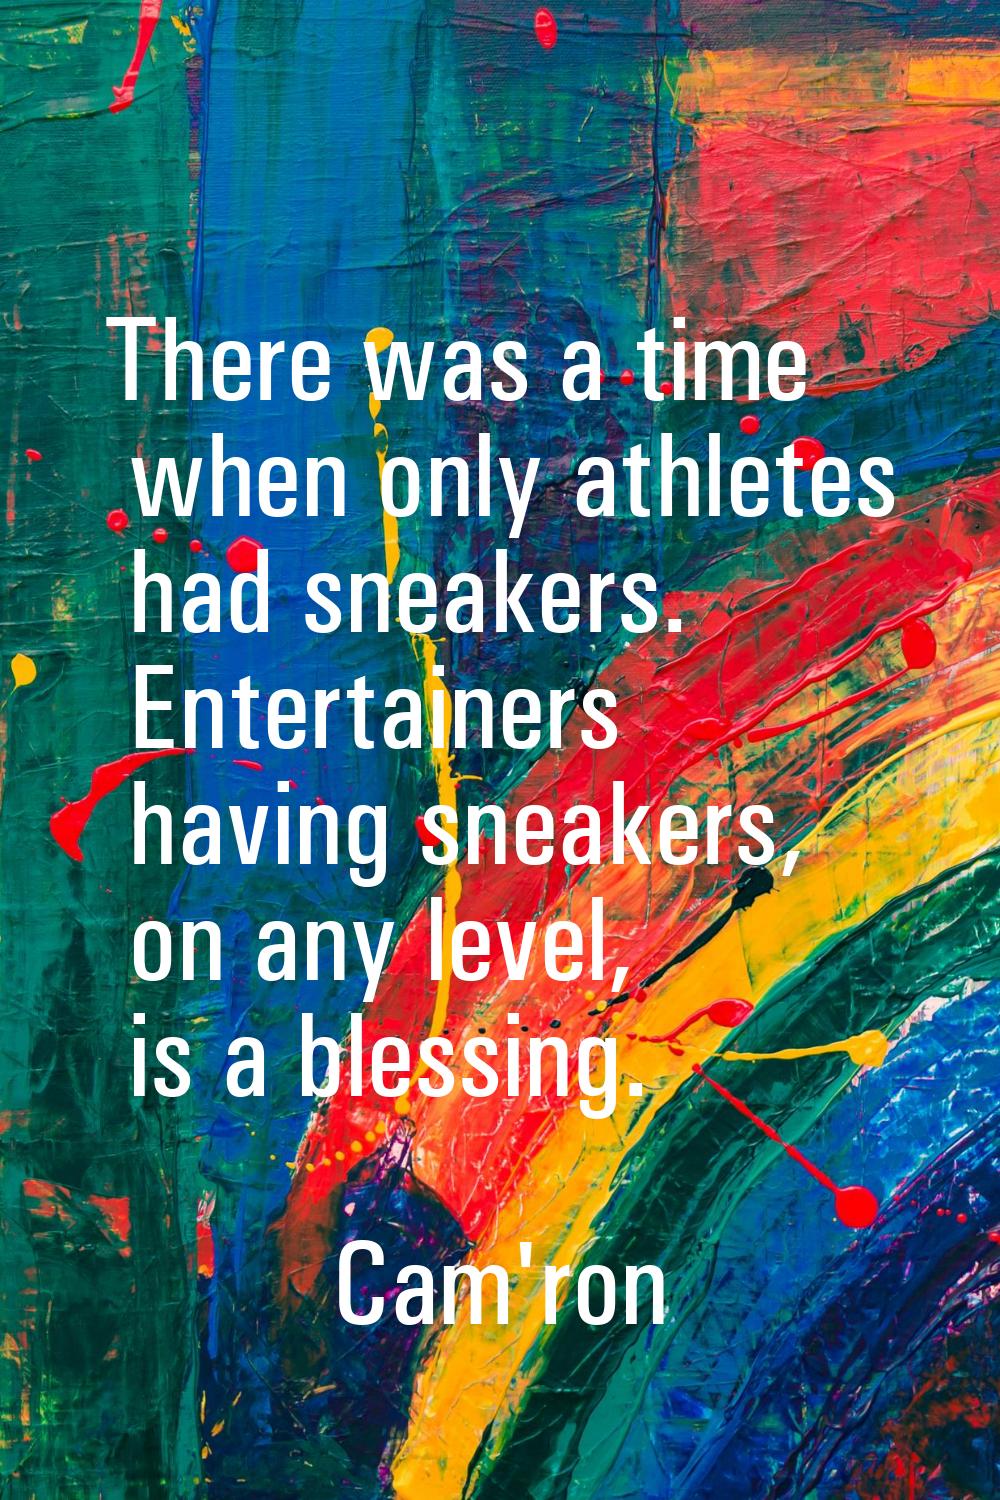 There was a time when only athletes had sneakers. Entertainers having sneakers, on any level, is a 